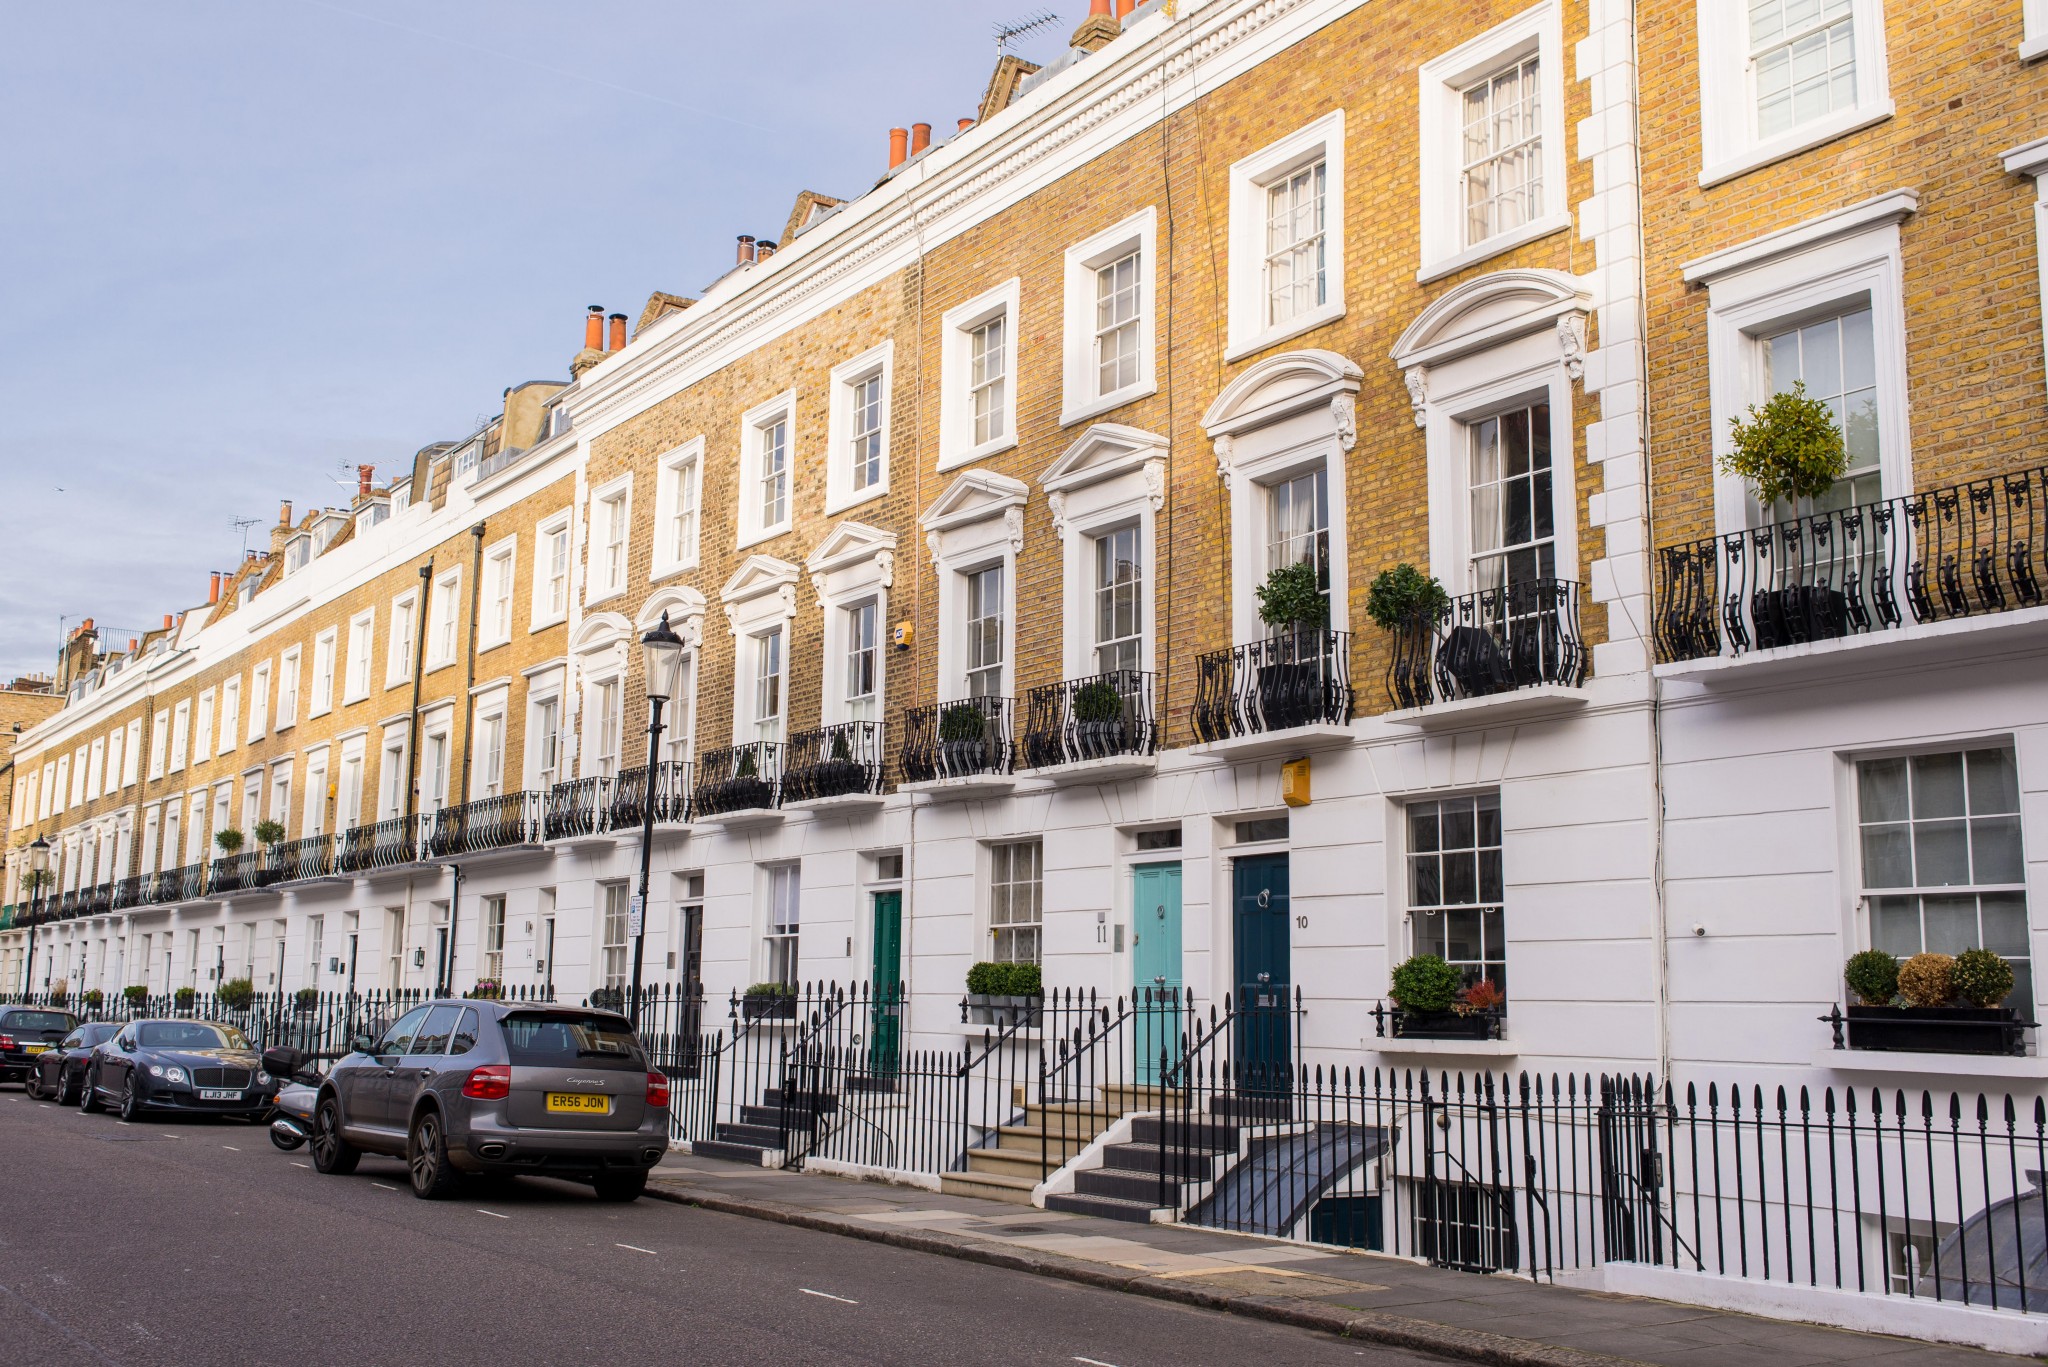 Chelsea property in the spotlight | Mayfair Times